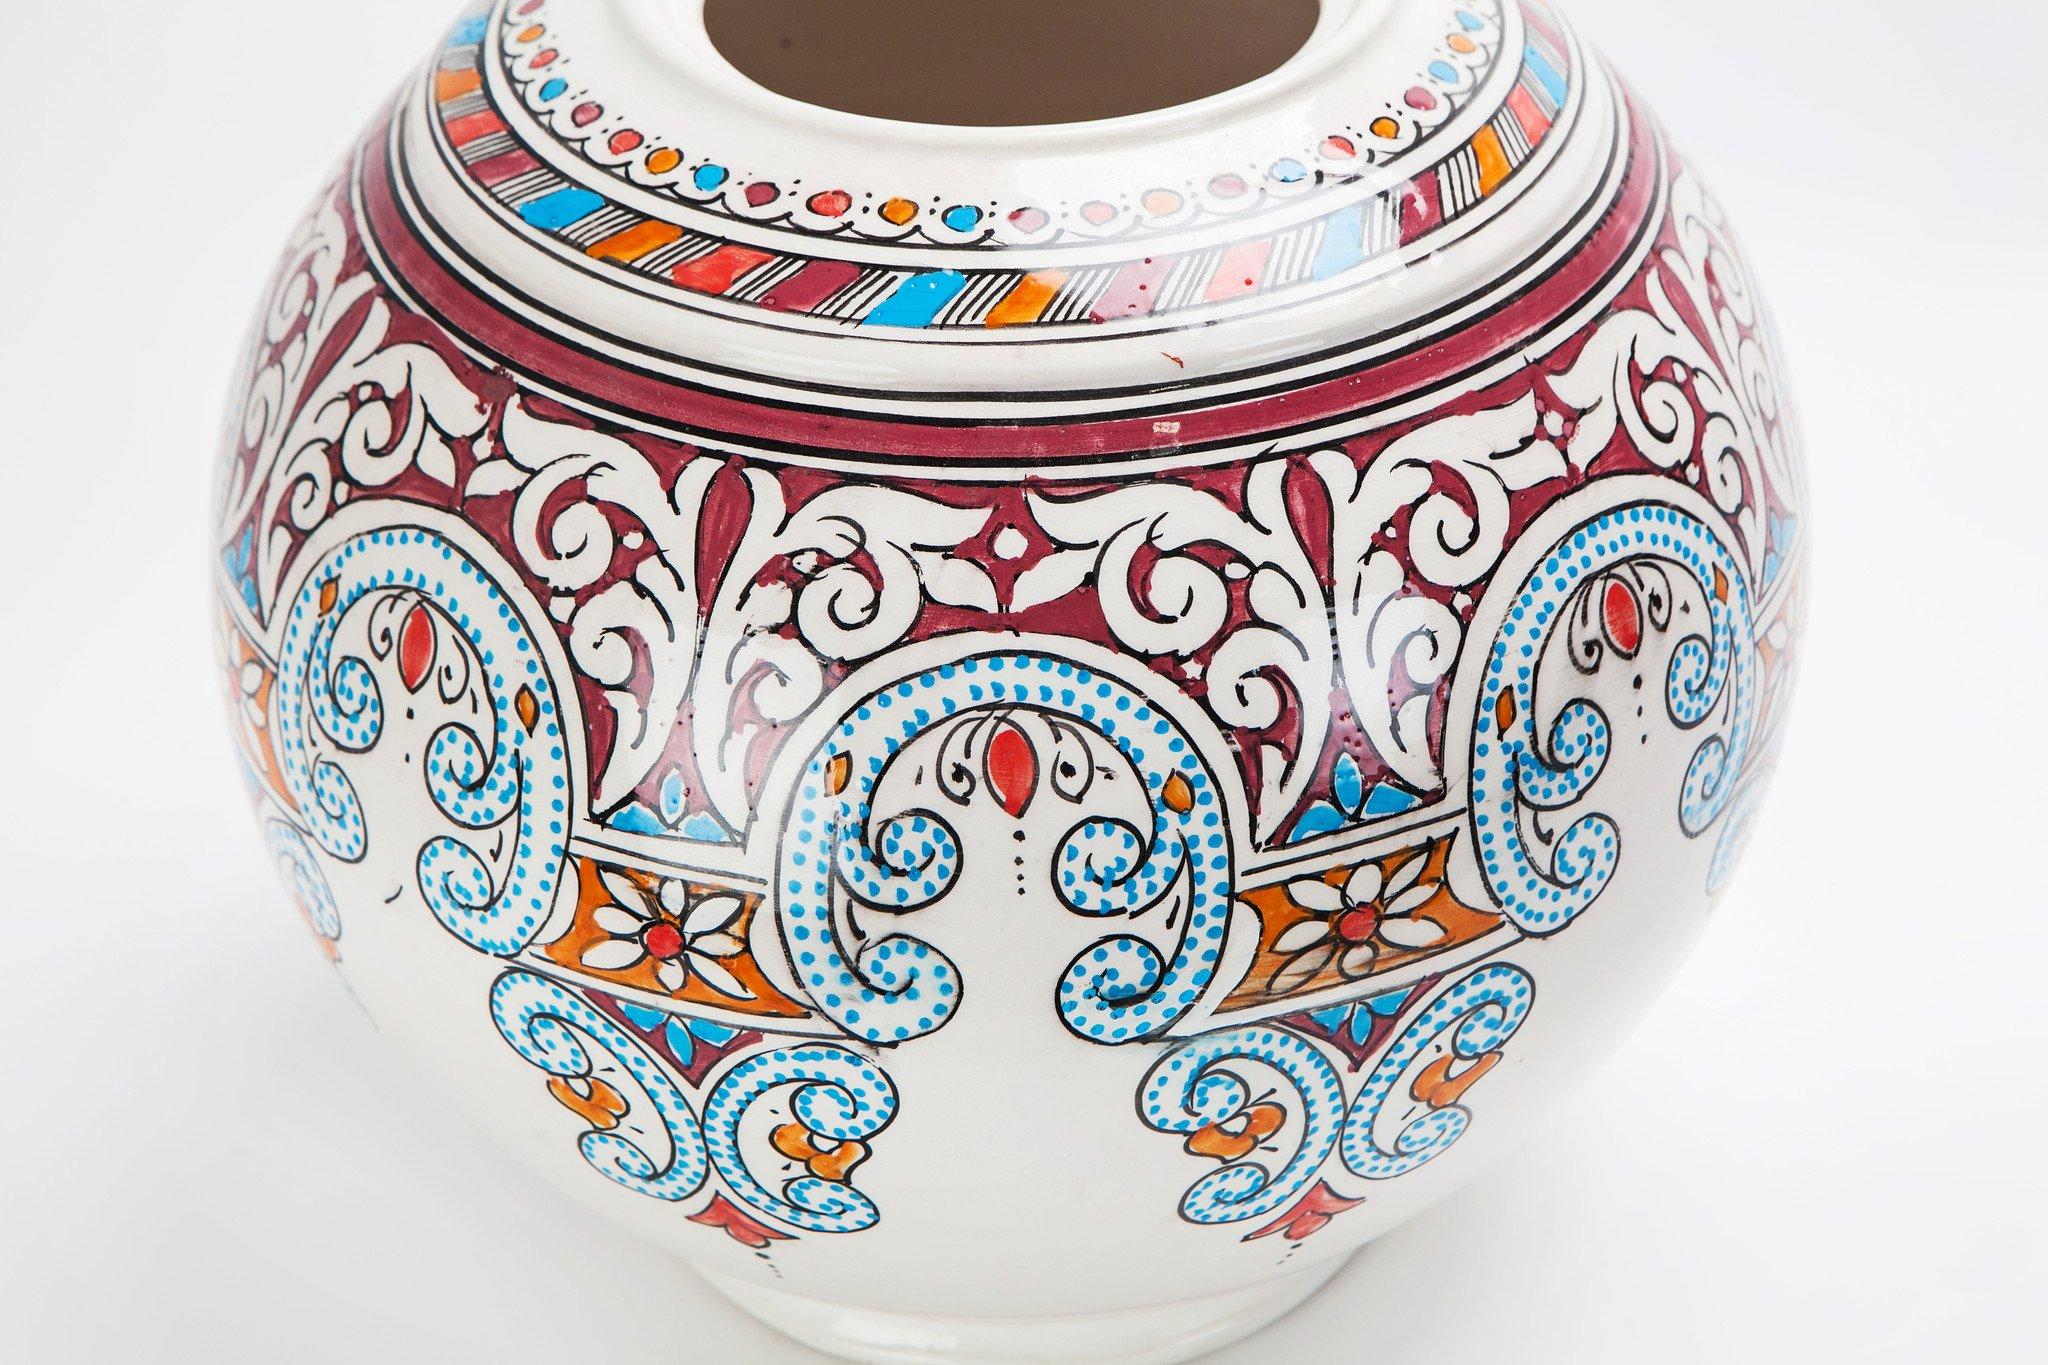 This beautiful hand painted ceramic Moroccan round vase or urn Features wonderfully intricate and imaginatively sequenced hand painted designs. This colorful, round, orb-like ceramic vase provides a touch of exotic sophistication that will elevate